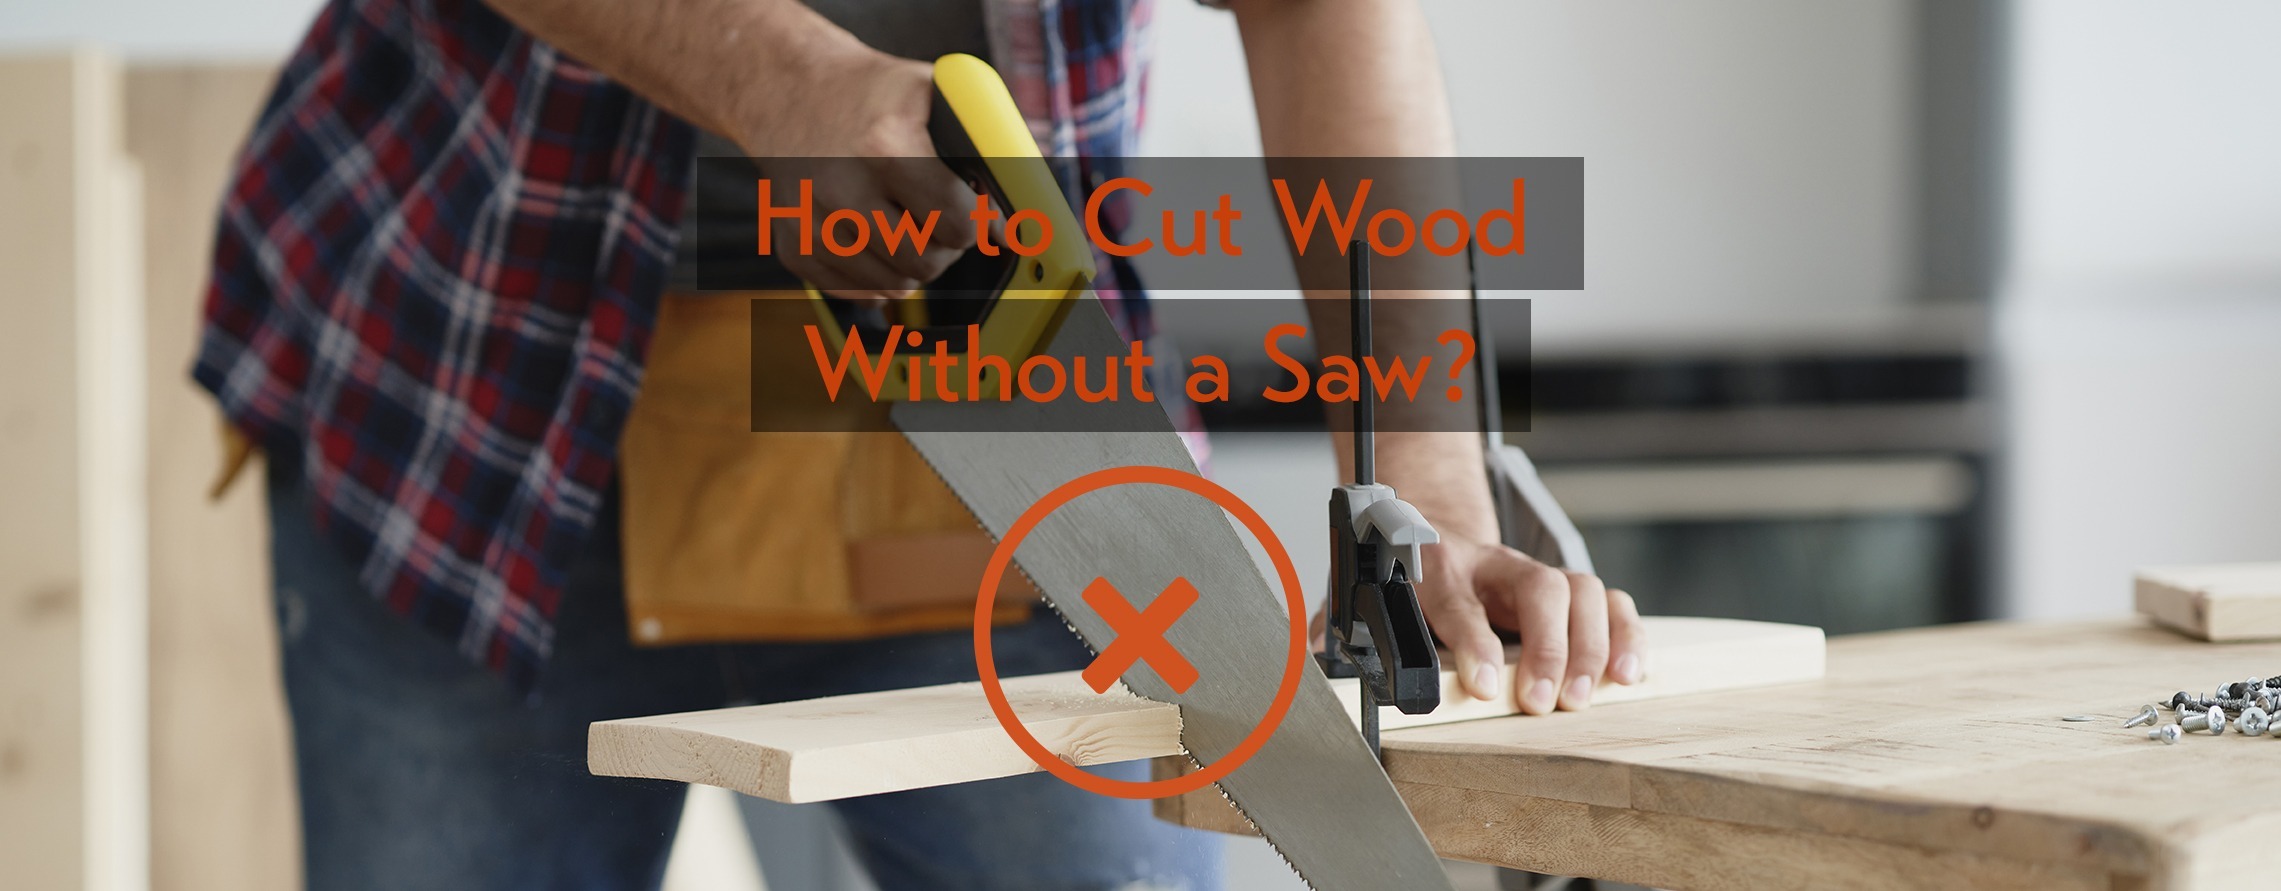 how to cut thin wood without a saw ft